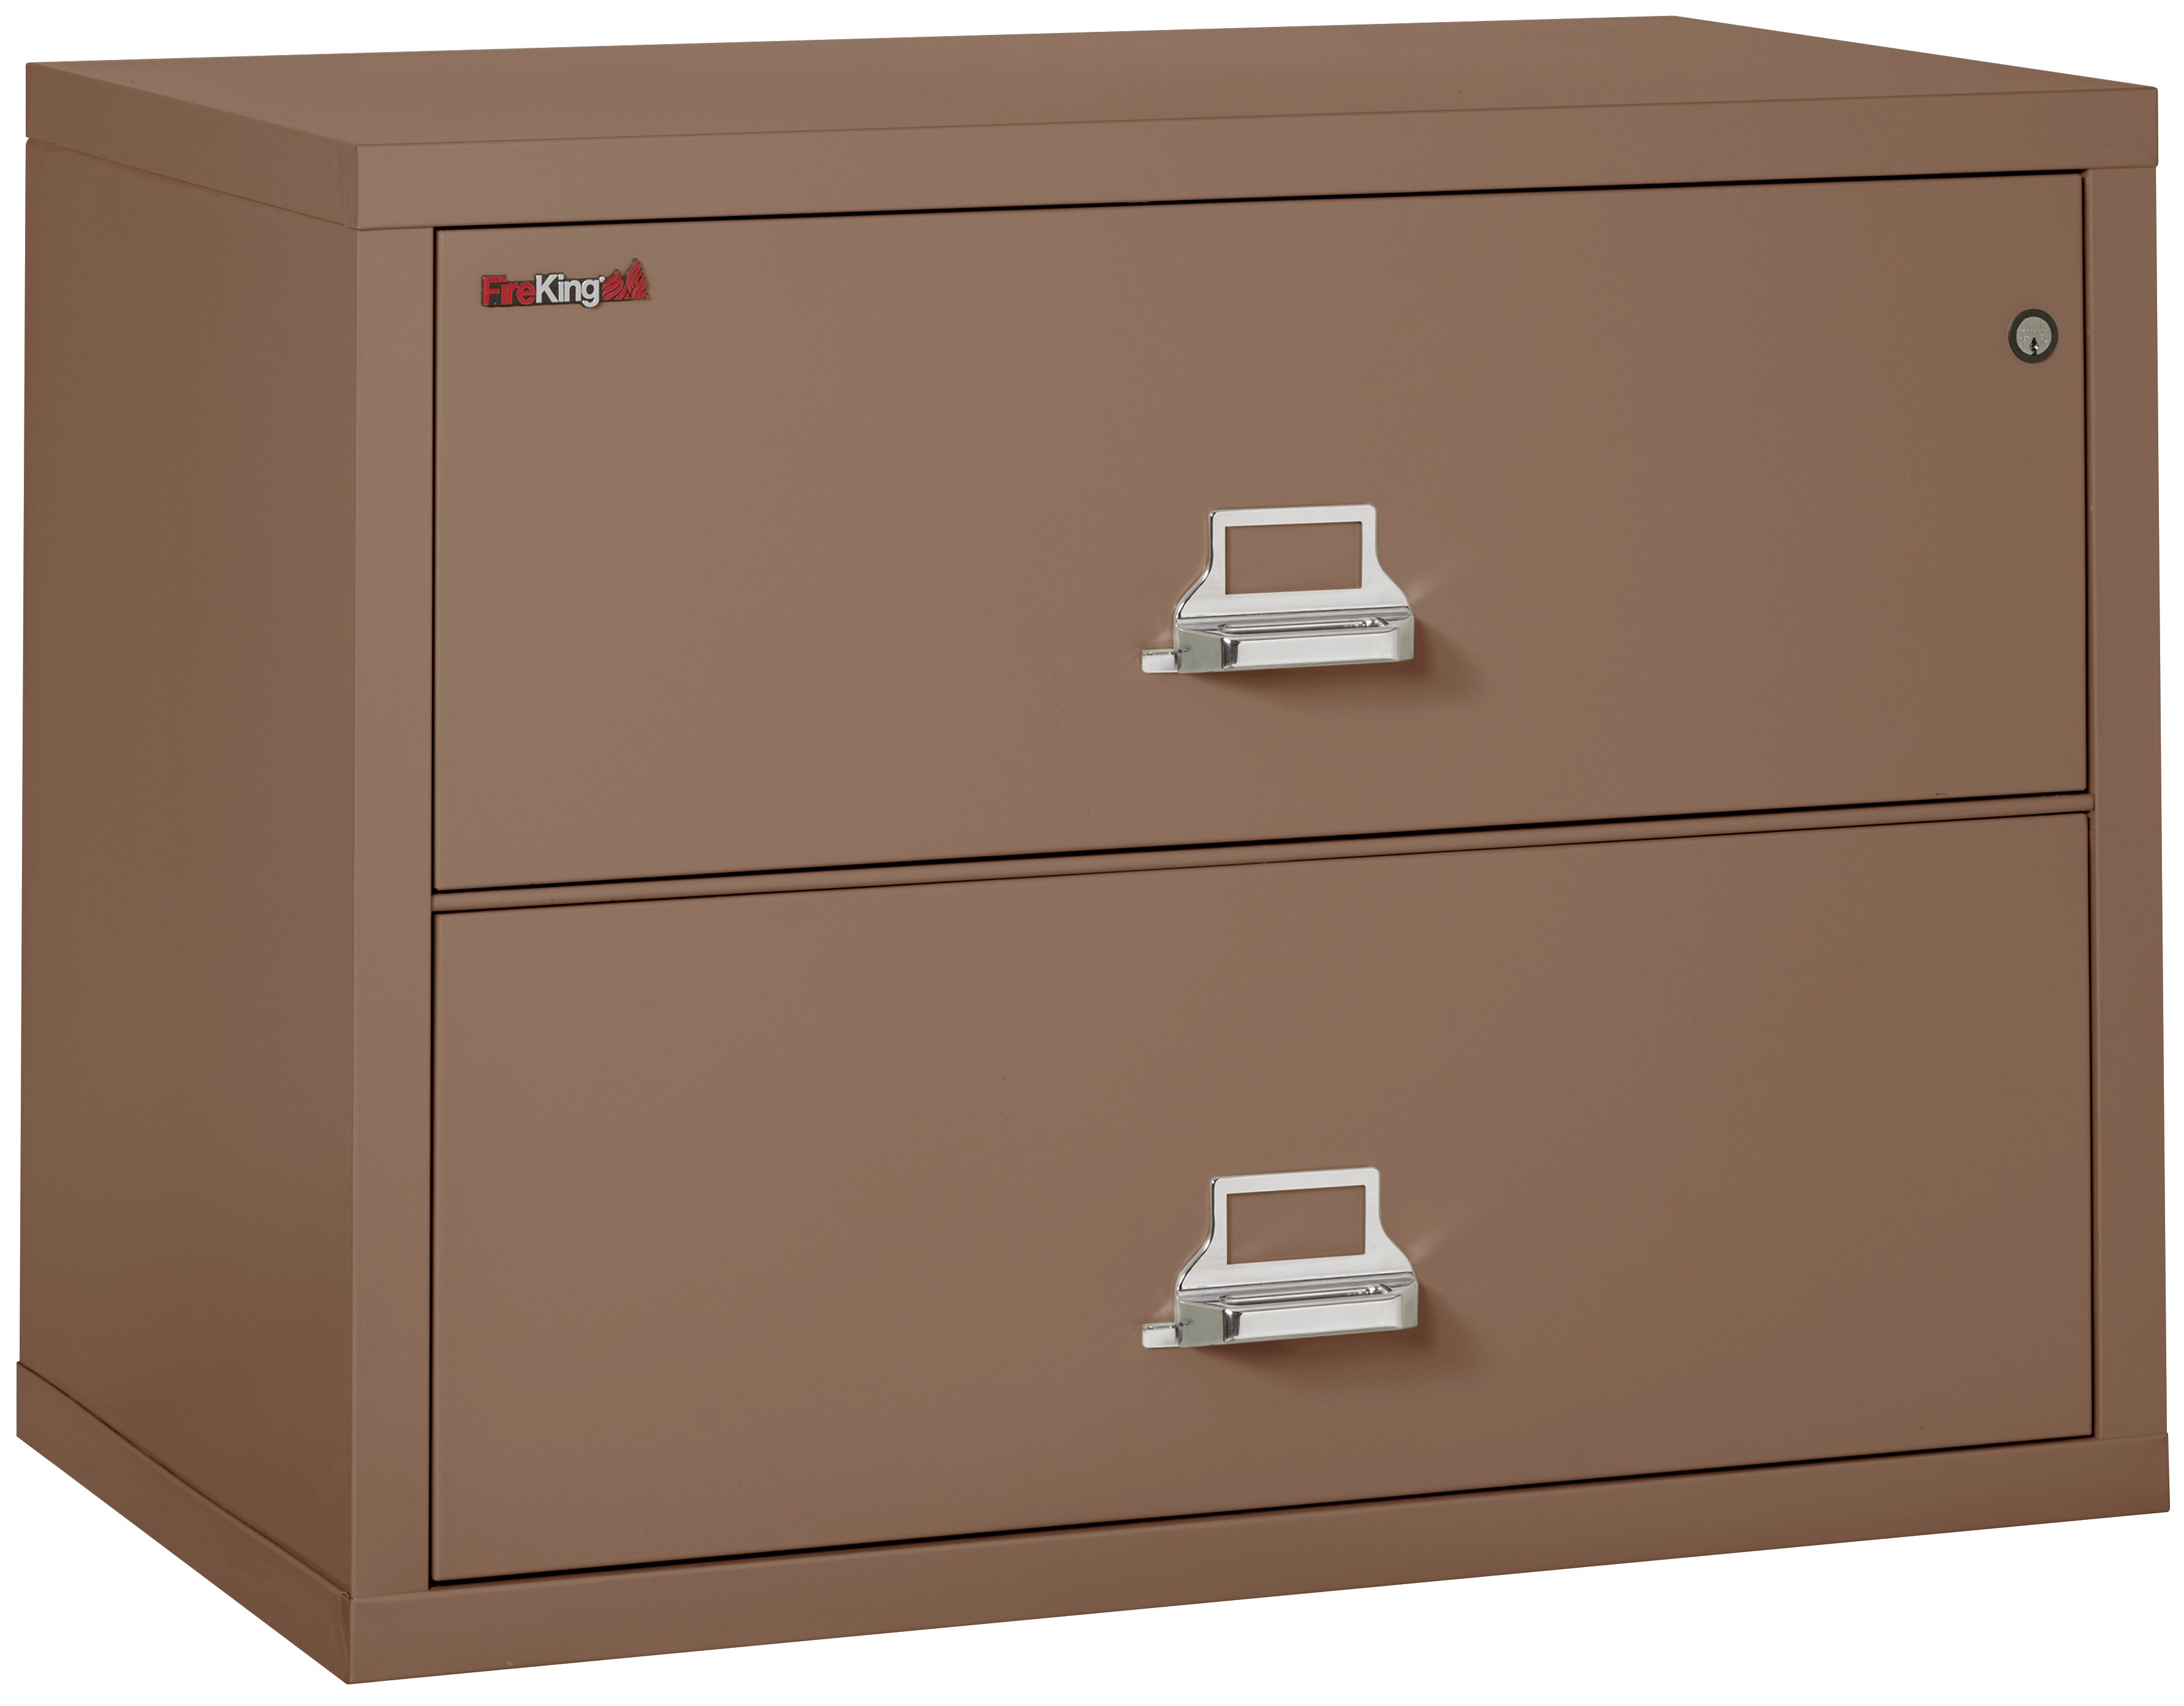 Fireking 2 Drawer 38" wide Classic Lateral fireproof File Cabinet-Tan - image 1 of 1